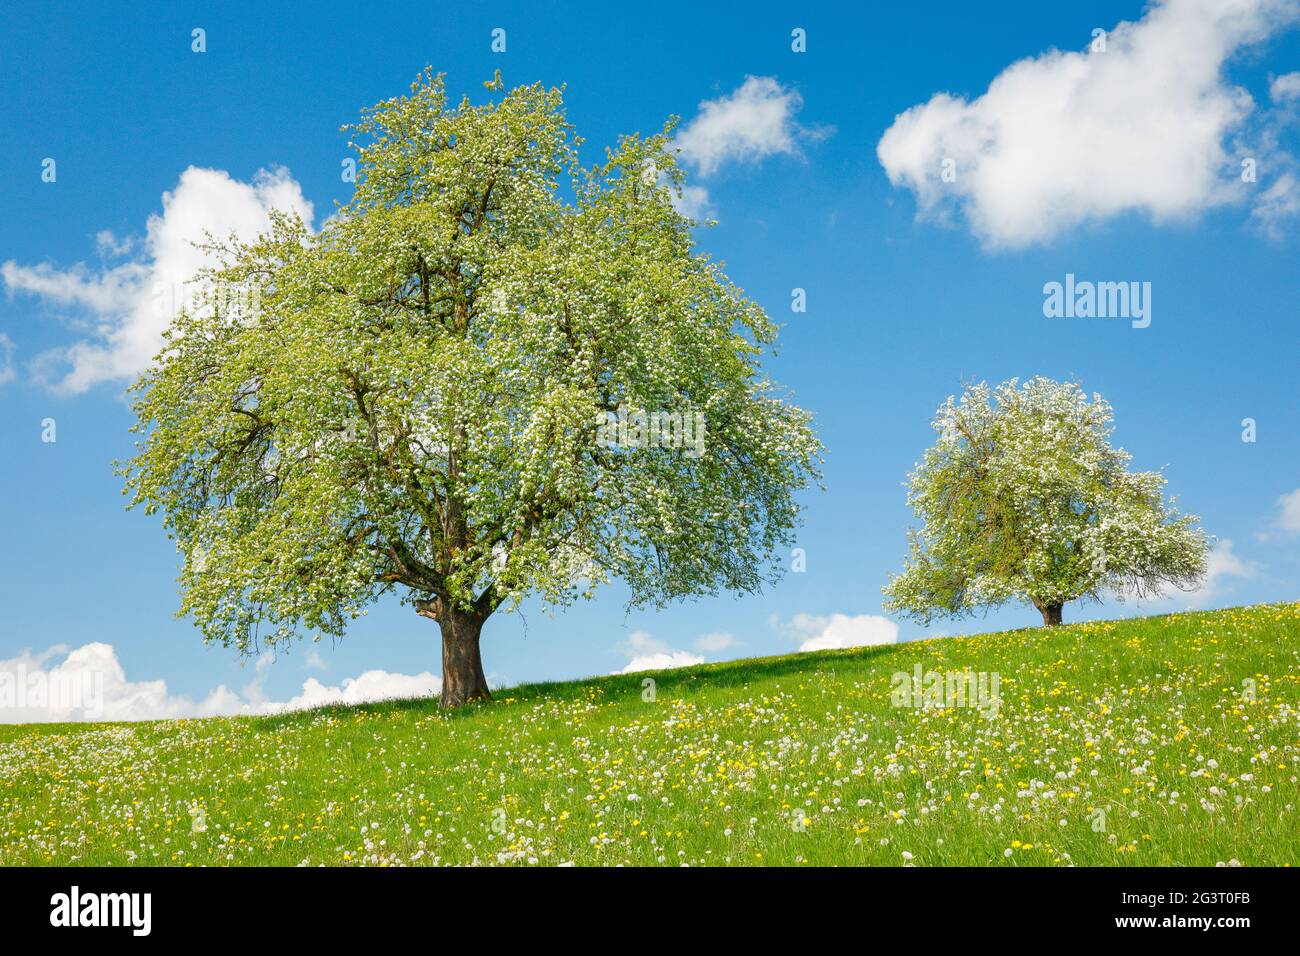 Common pear (Pyrus communis), two blooming pear trees in a flower medow in spring on Hirzel, Switzerland Stock Photo